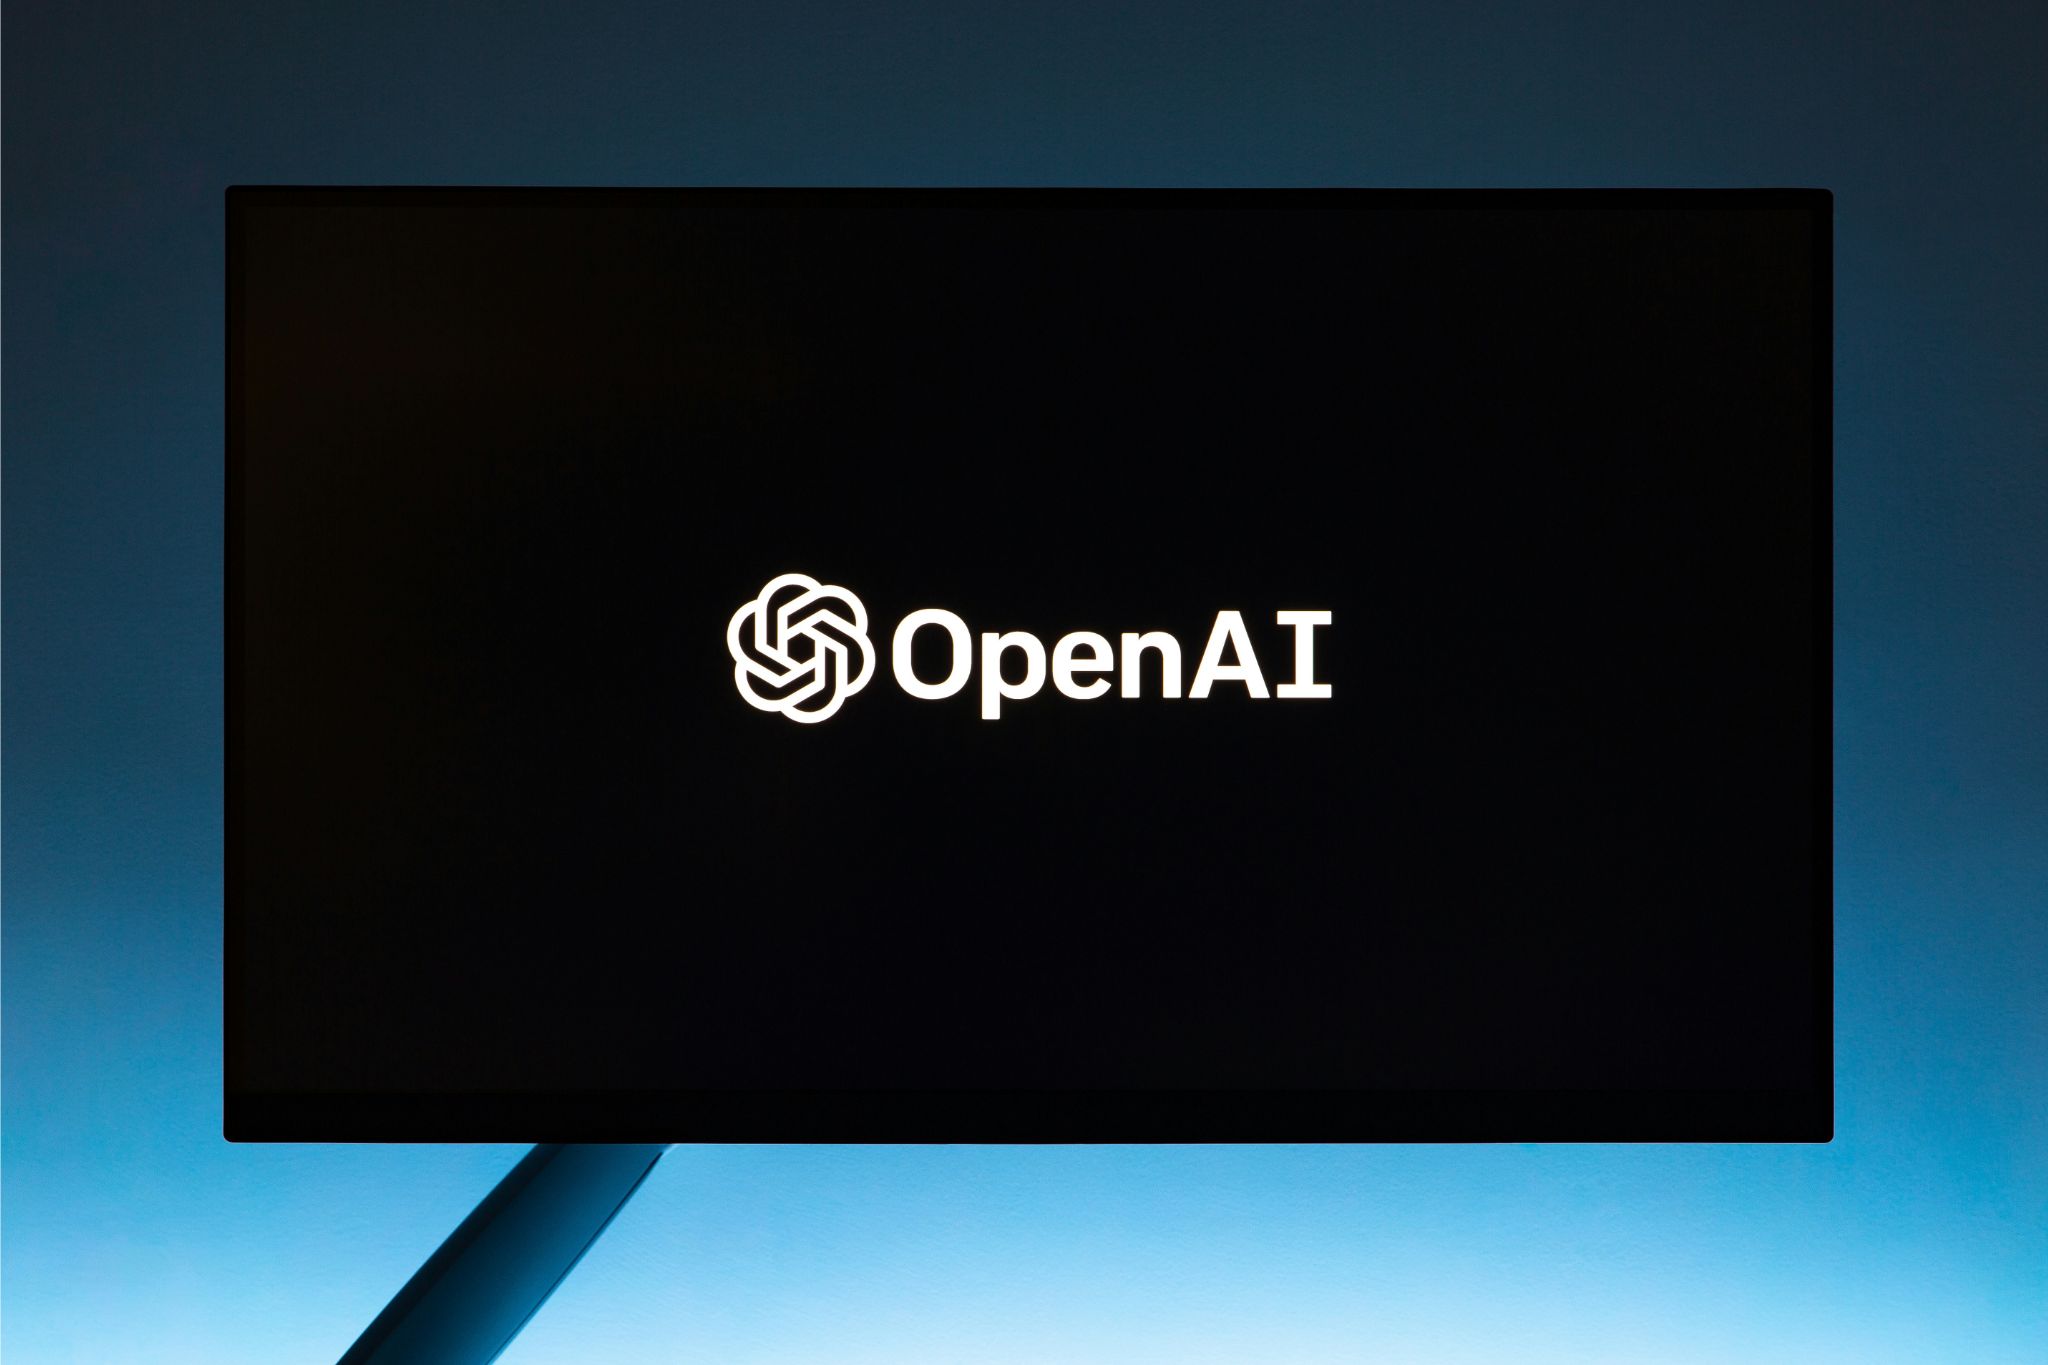 Reddit Sellout to OpenAI Is a Win for Both Companies, Except Perhaps for End Users